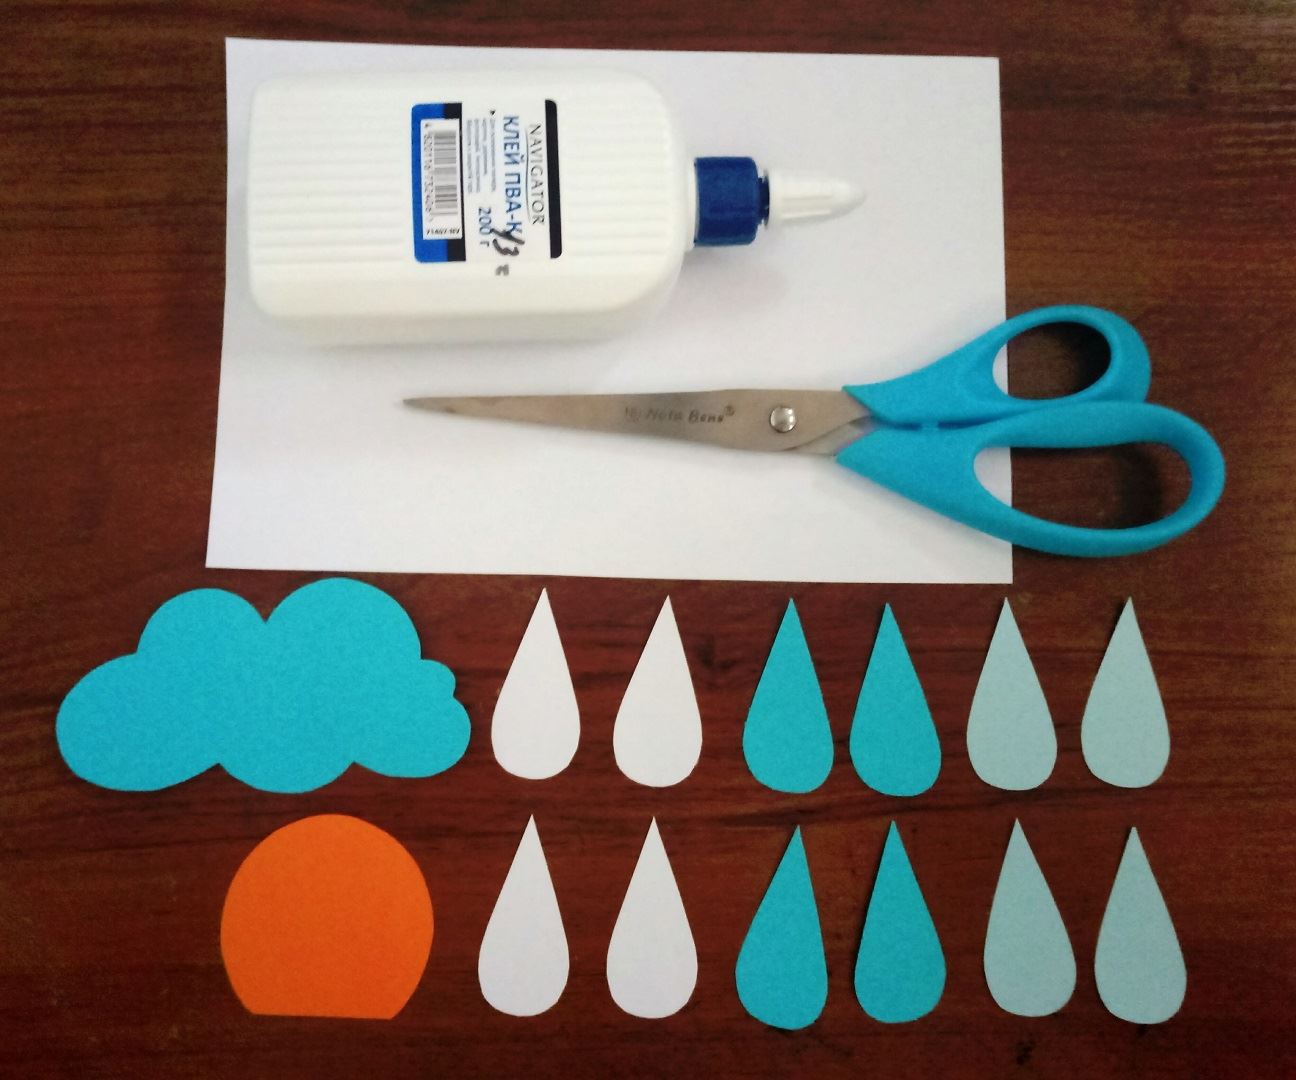 First we cut out droplets of white, blue and dark blue paper. Then a circle with a cut edge and a cloud.